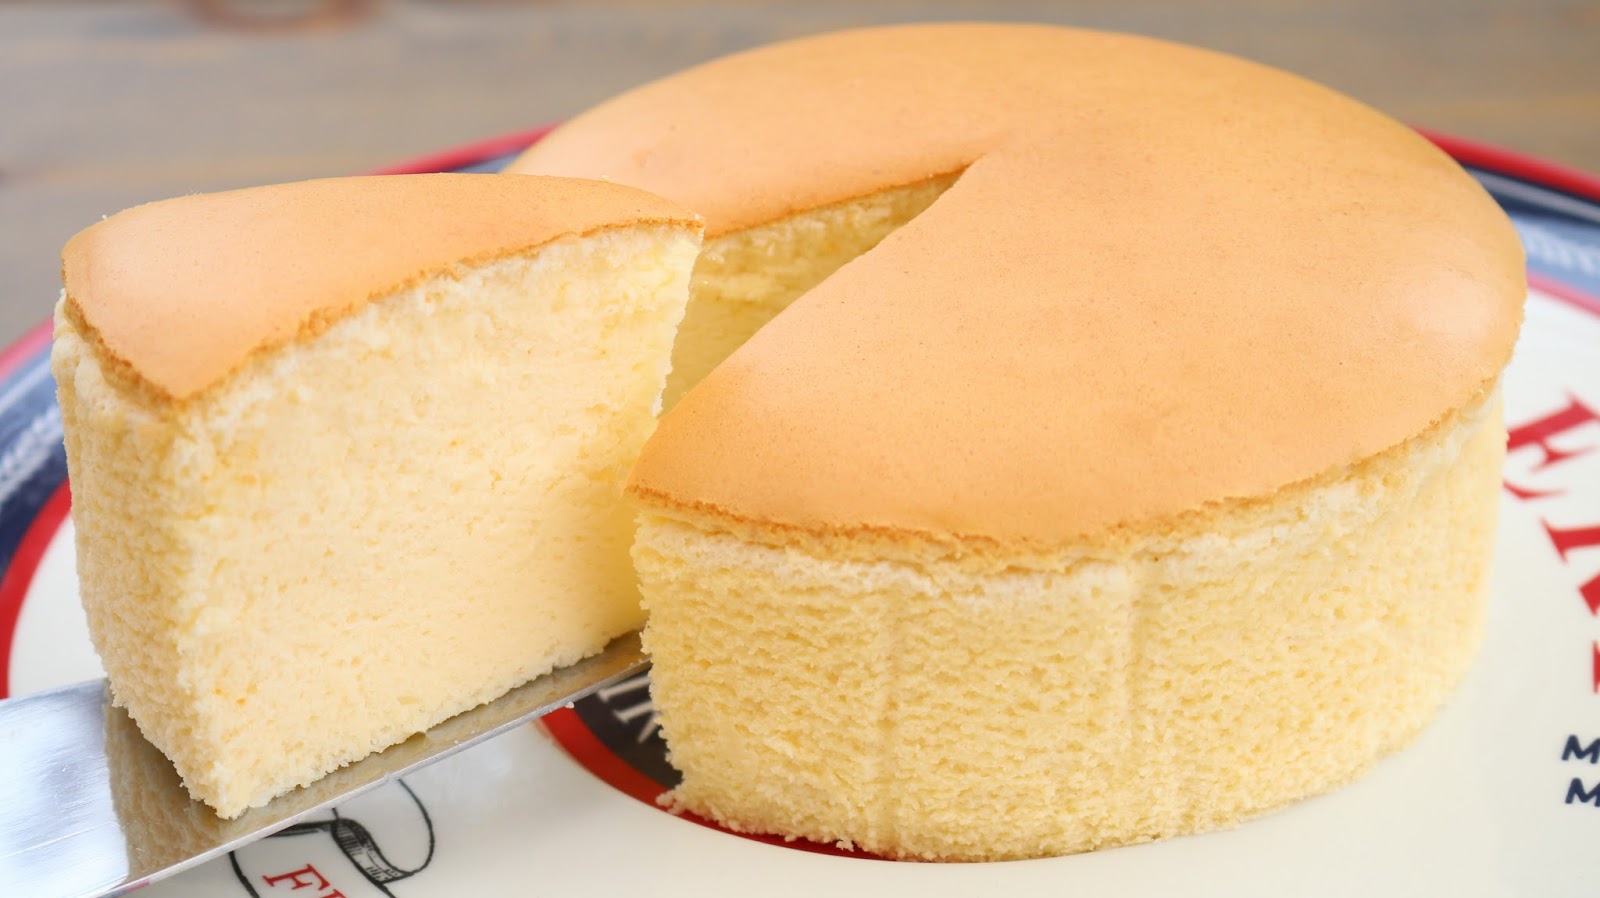 What makes Japanese cheesecake different?